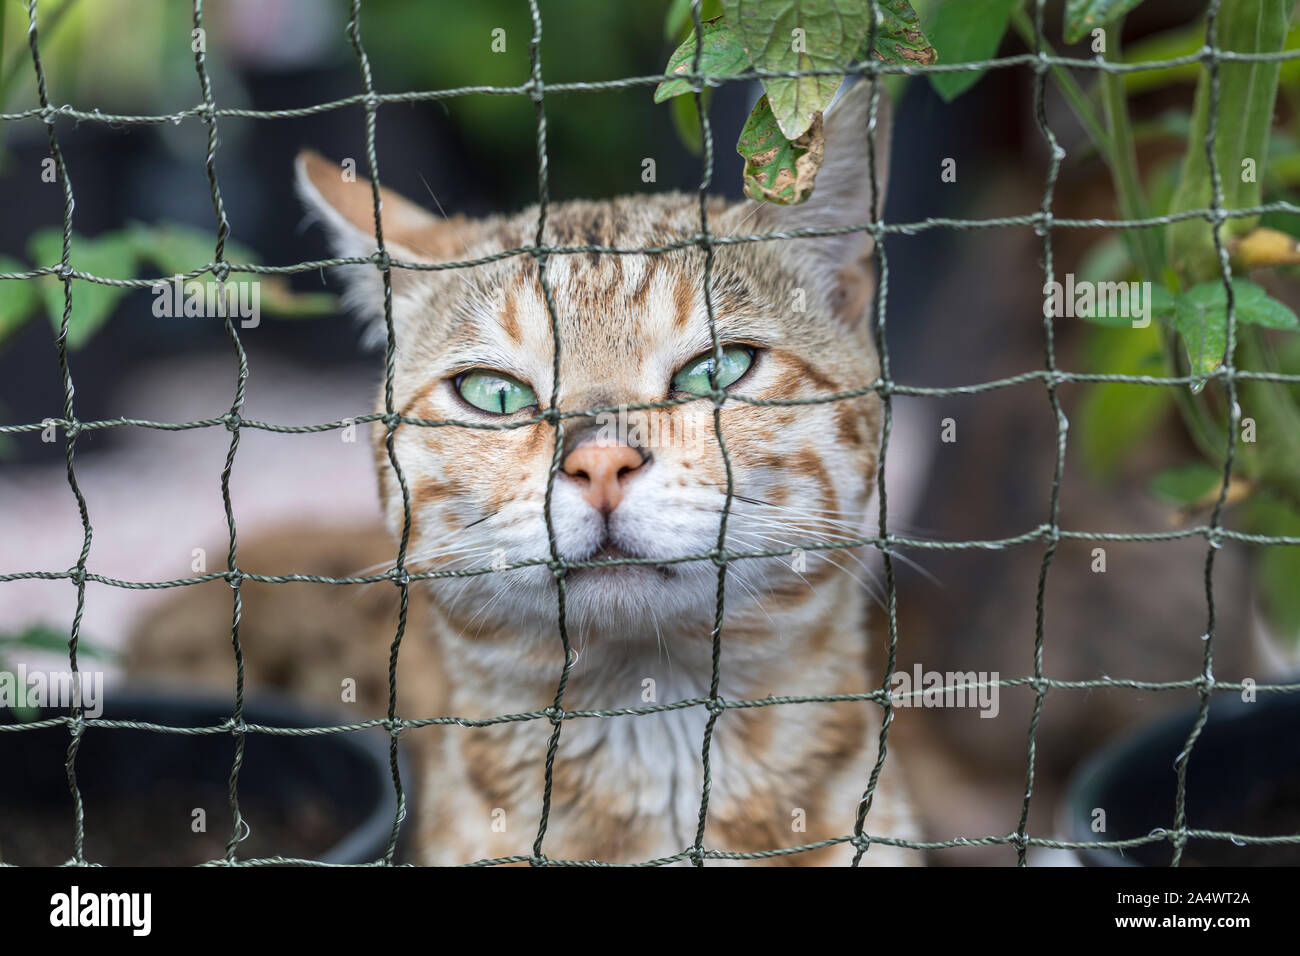 A purebred Bengeal cat in an outdoor cat cage. The cat is surrounded by plants and he is looking displeased. Close-up. Stock Photo